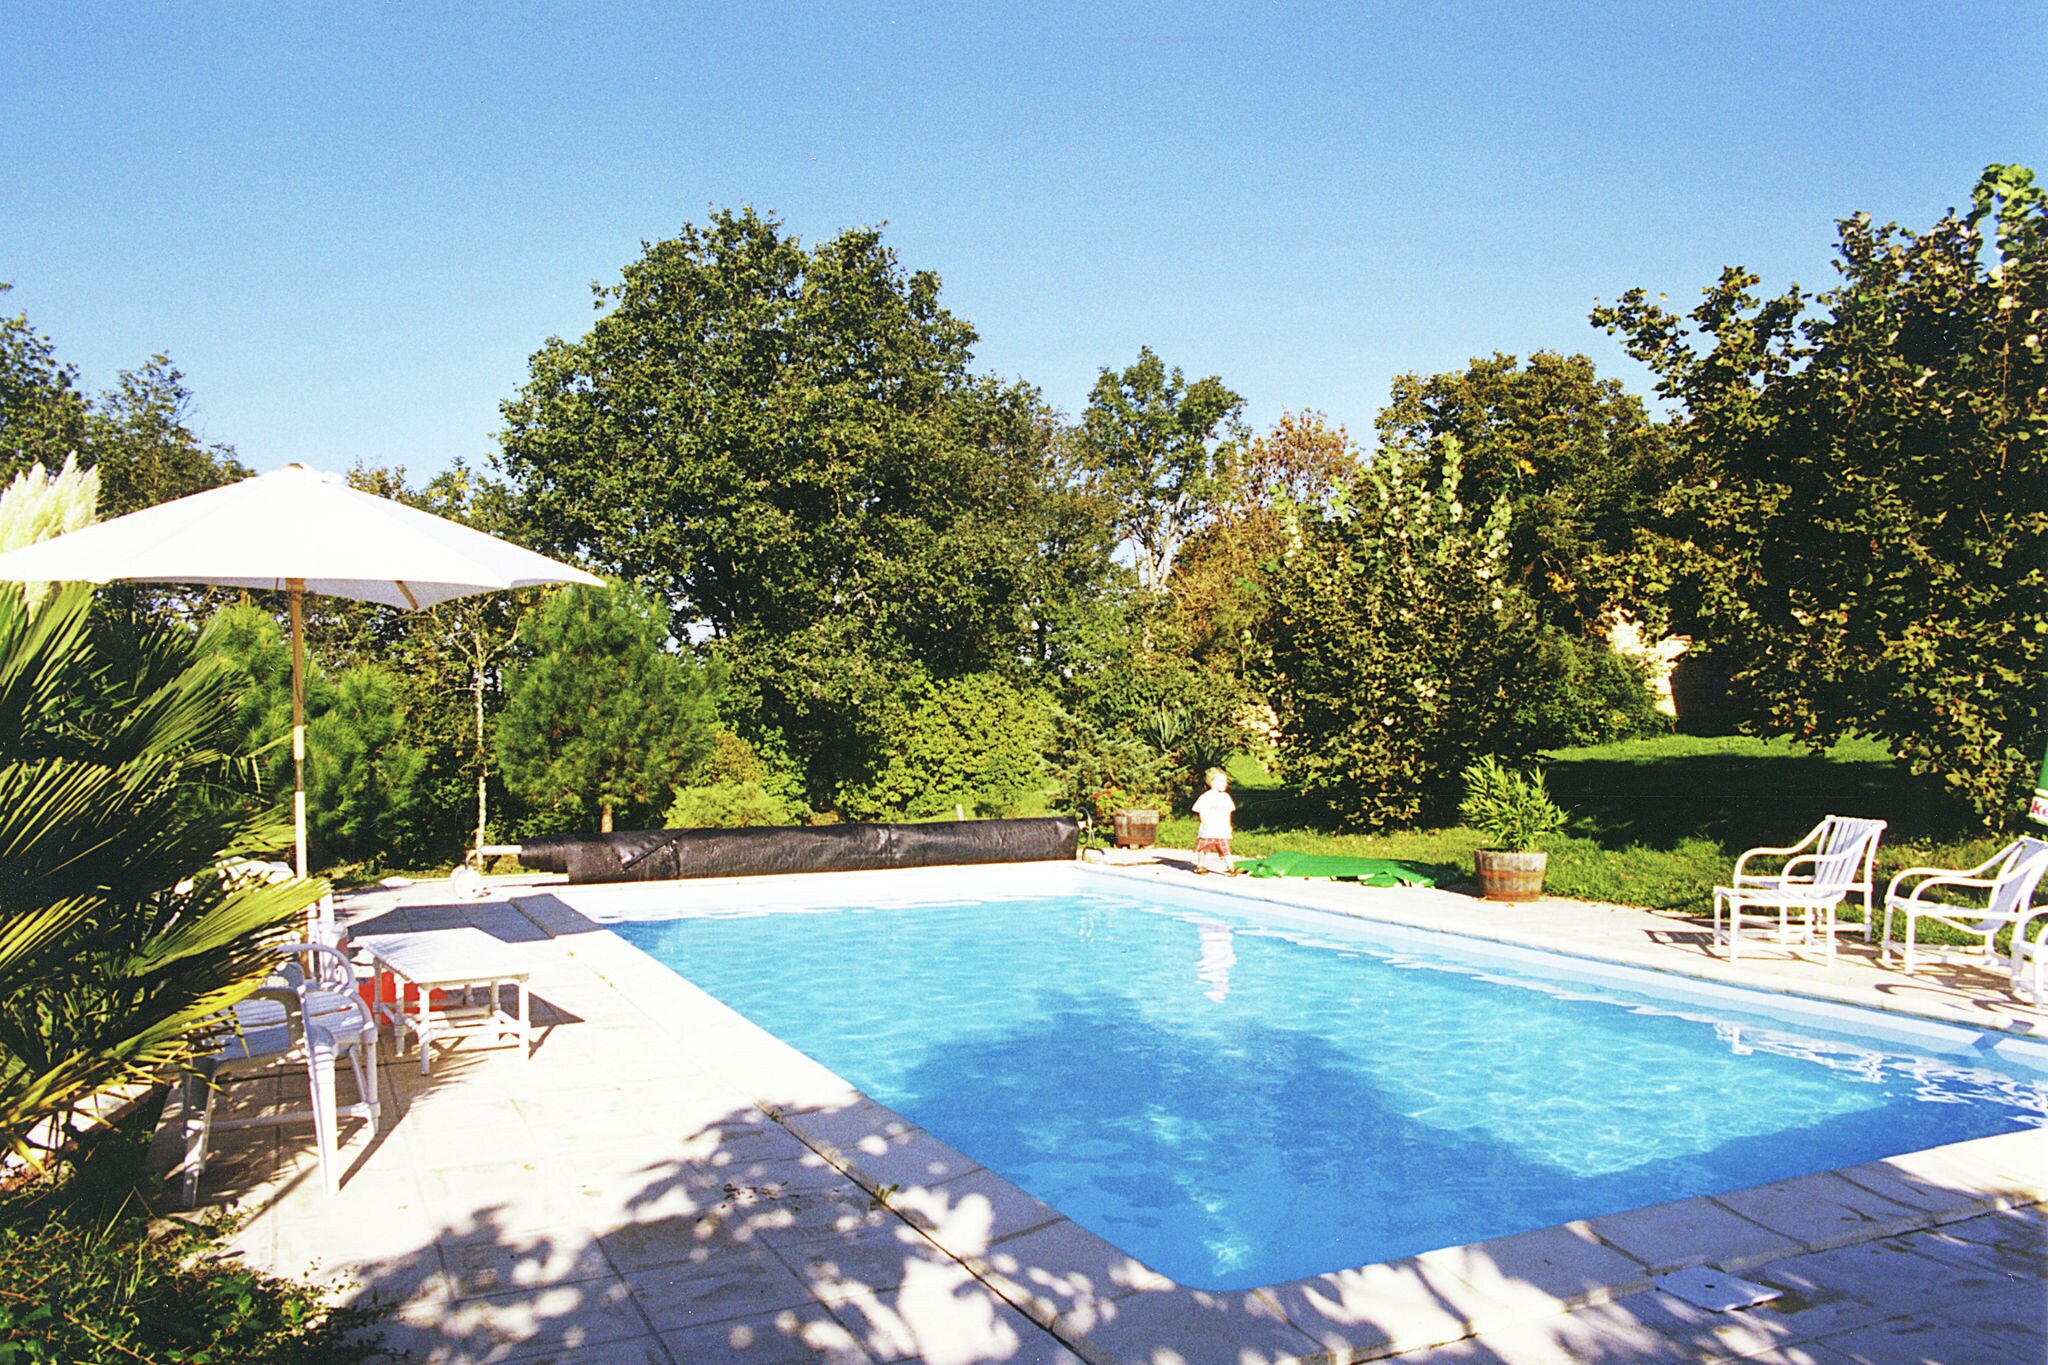 Holiday home with AC and private pool in forested surroundings.